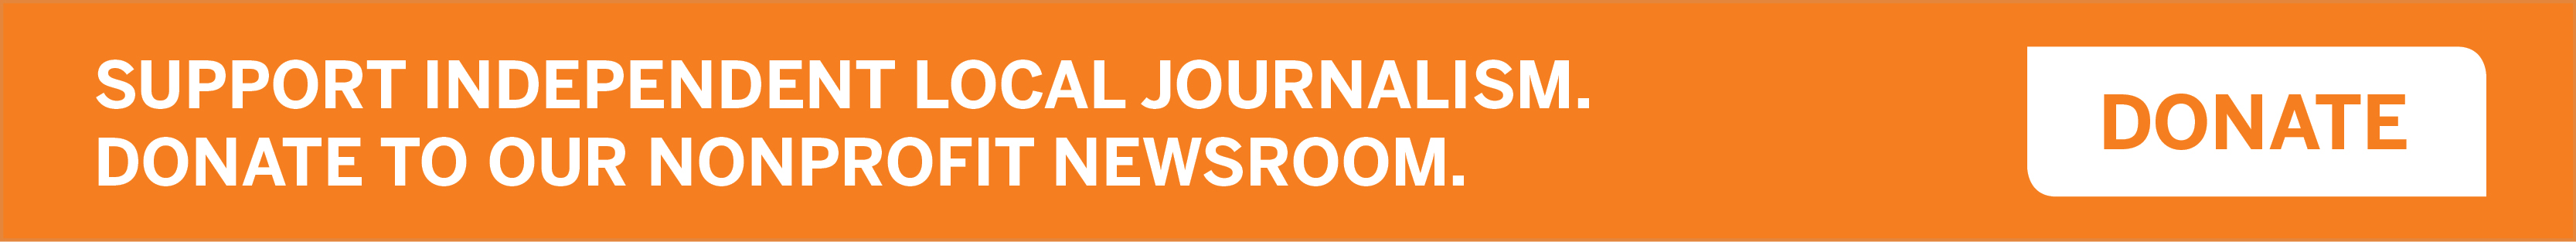 Support independent local journalism. Support our nonprofit newsroom.